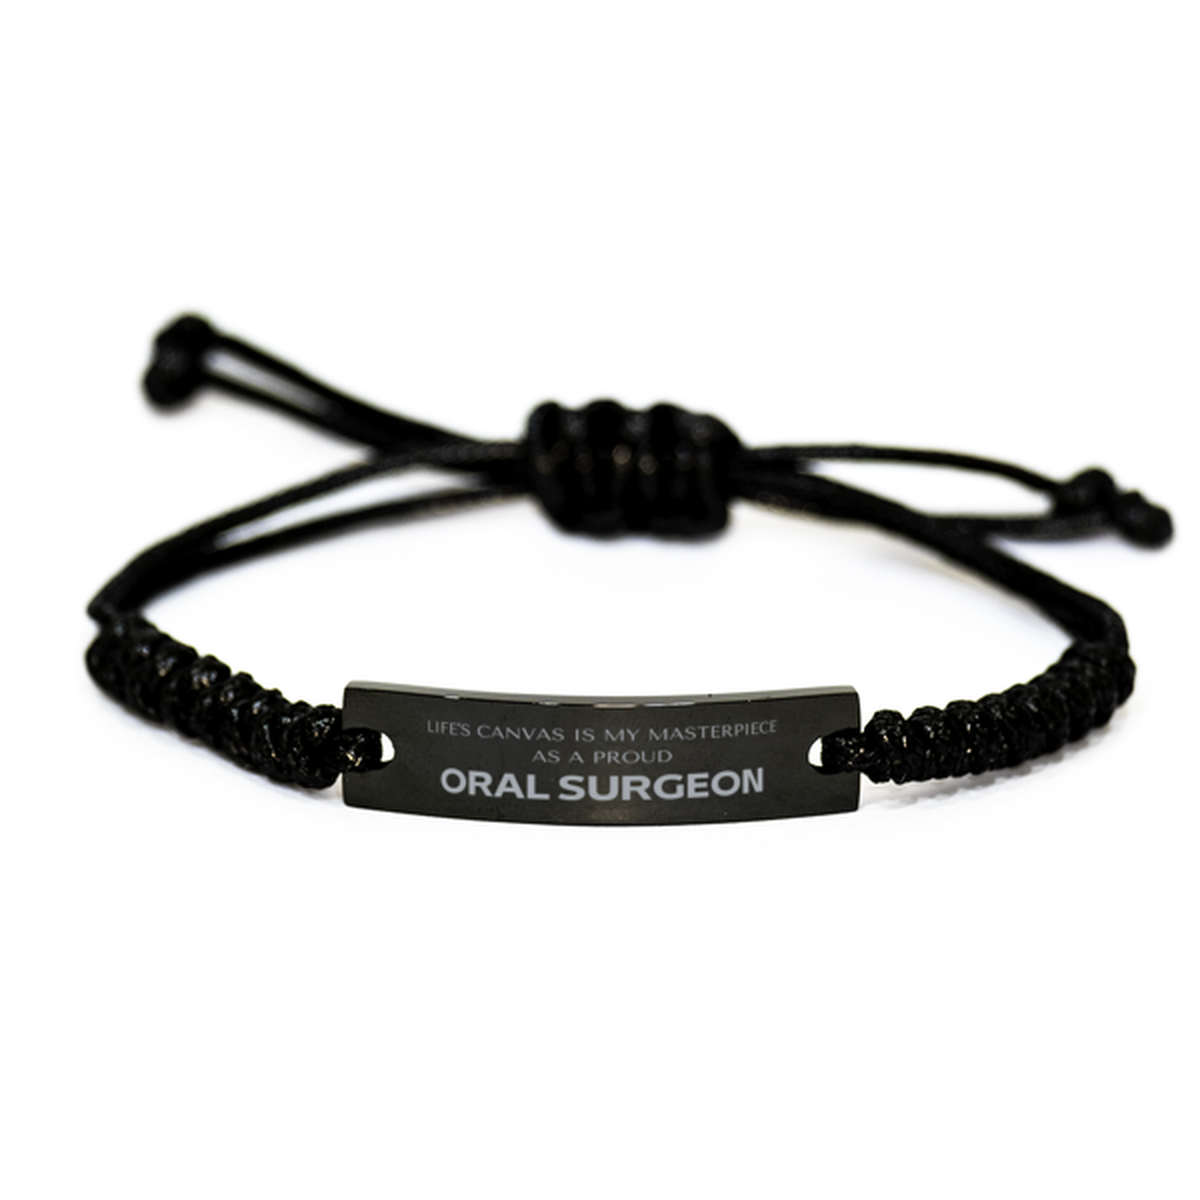 Proud Oral Surgeon Gifts, Life's canvas is my masterpiece, Epic Birthday Christmas Unique Black Rope Bracelet For Oral Surgeon, Coworkers, Men, Women, Friends